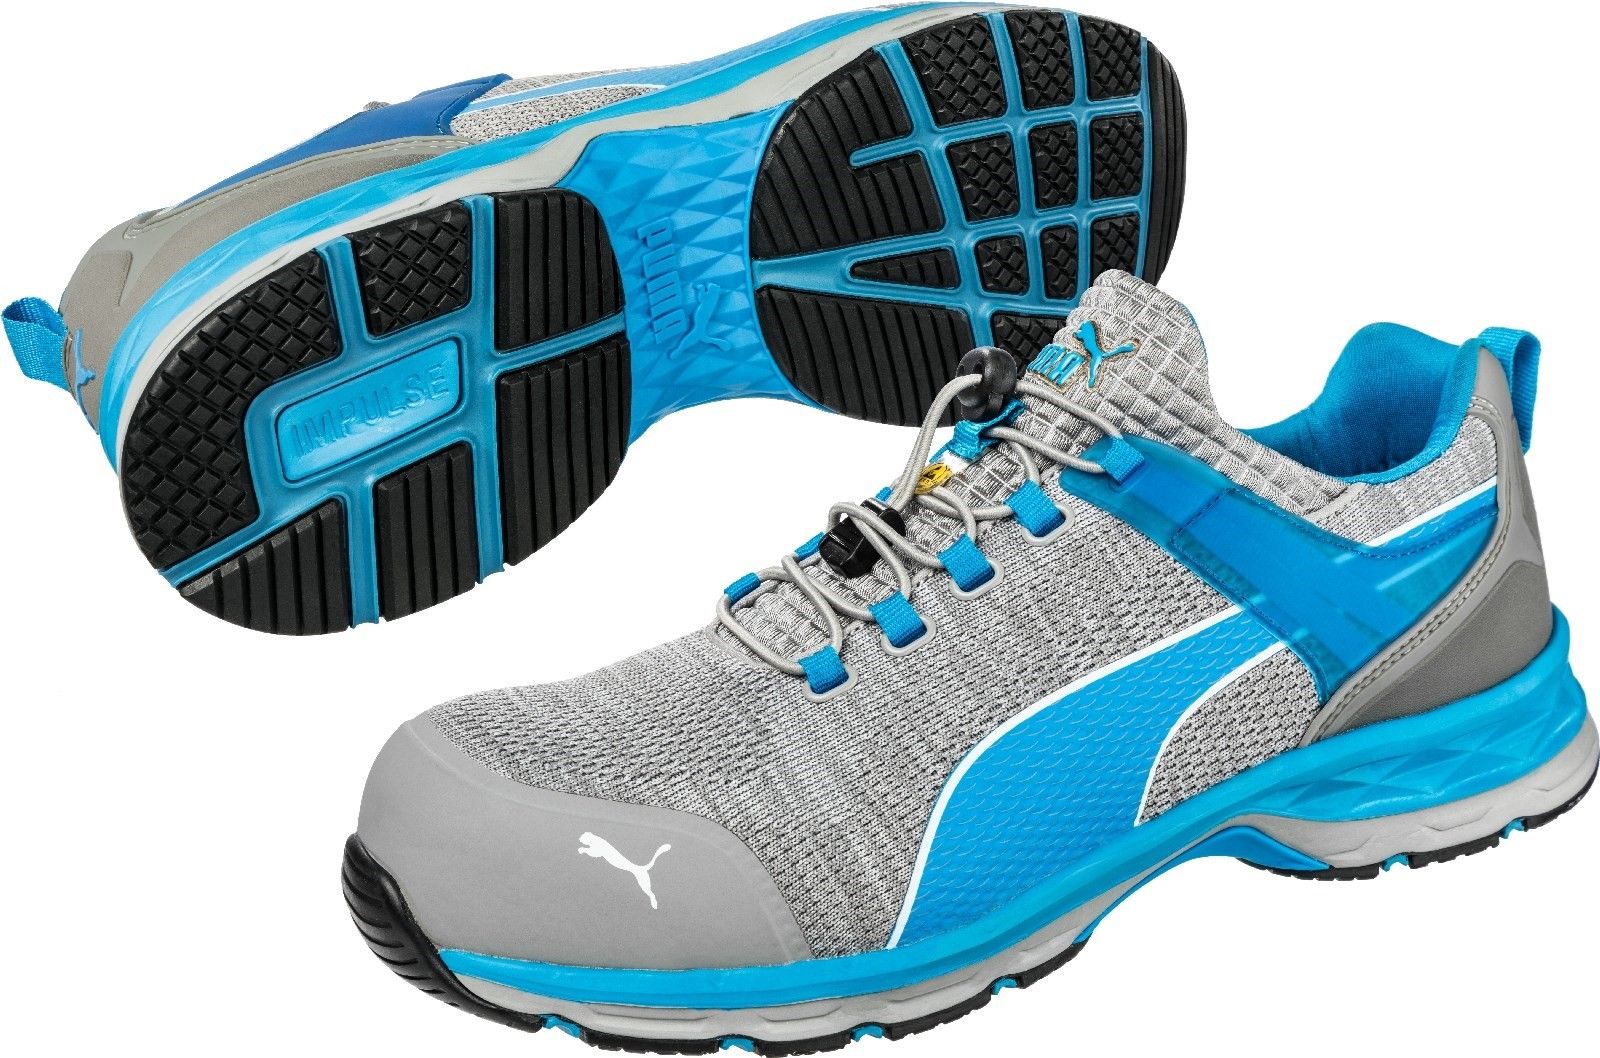 Xcite Low from Puma is a metal free safety shoe; fiberglass cap, flexible FAP midsole, heel support, quick lacing system and breathactive liningQuick lacing system. 
ESD - Impulse Foam midsole. 
Ideal for use in industry.